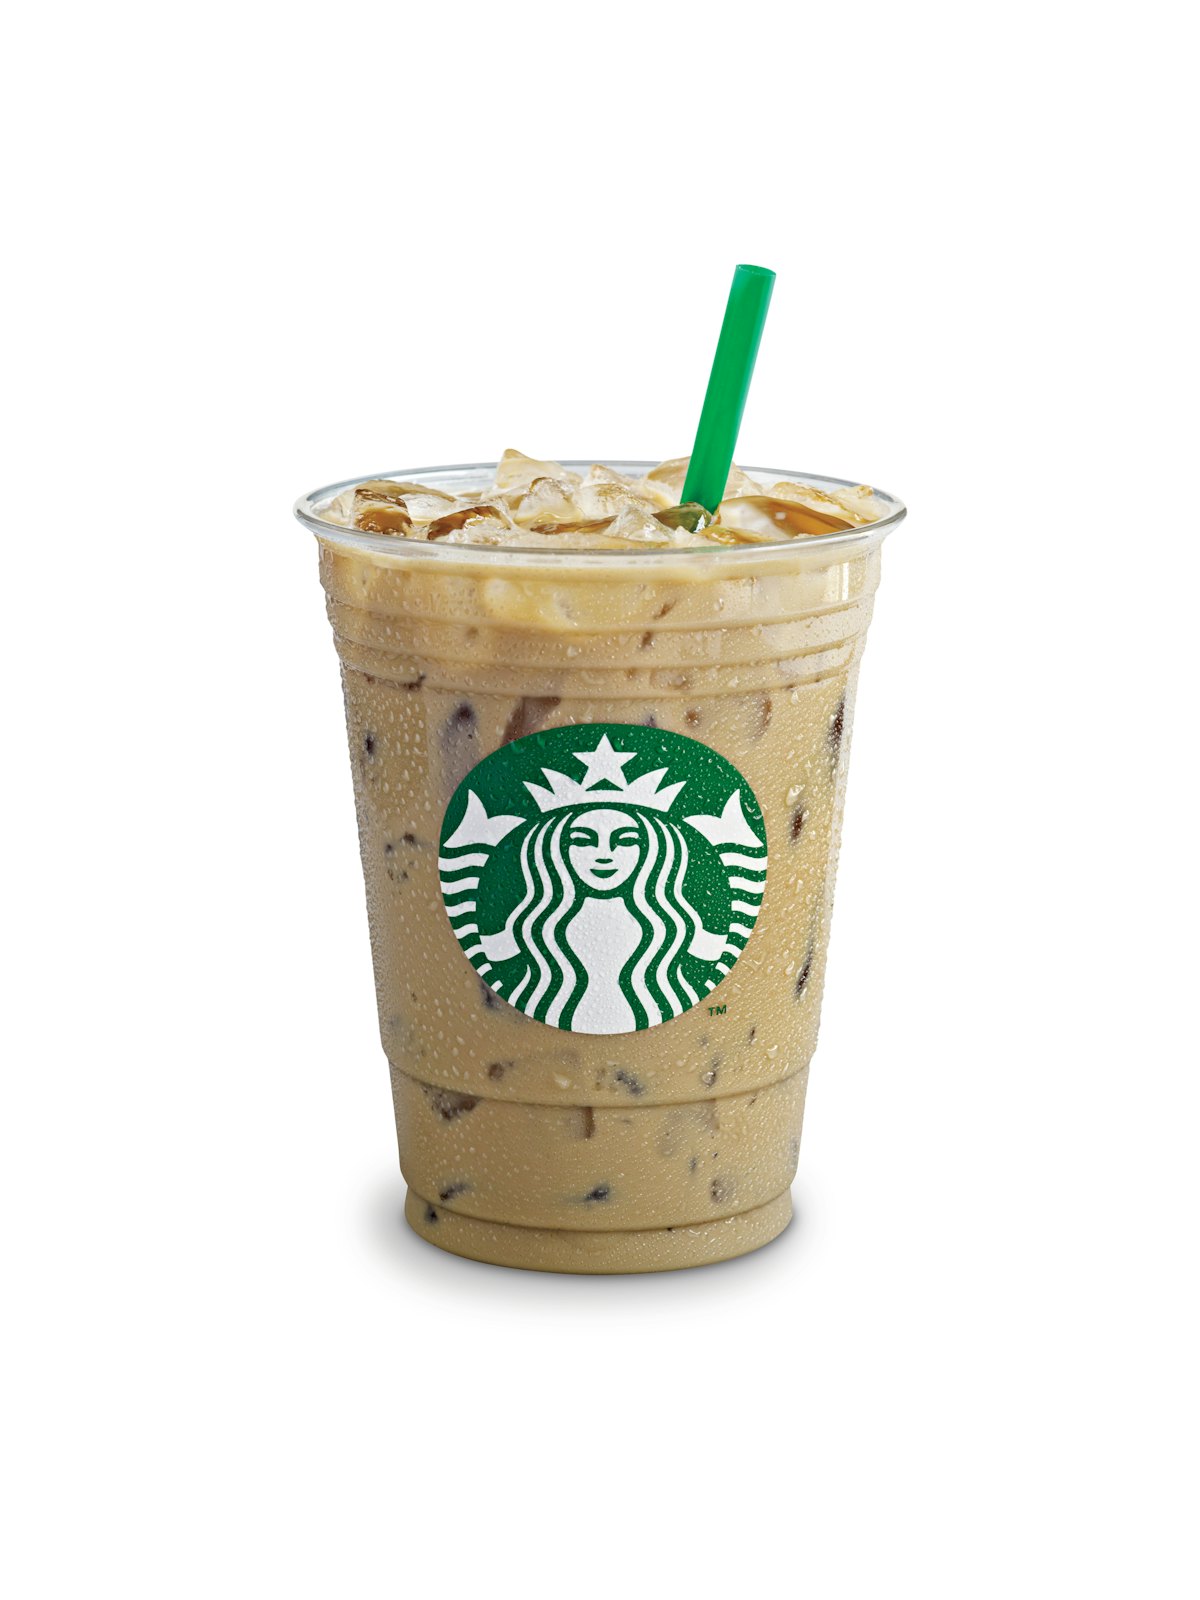 The Strongest Starbucks Vanilla Drinks To Give You A Boost